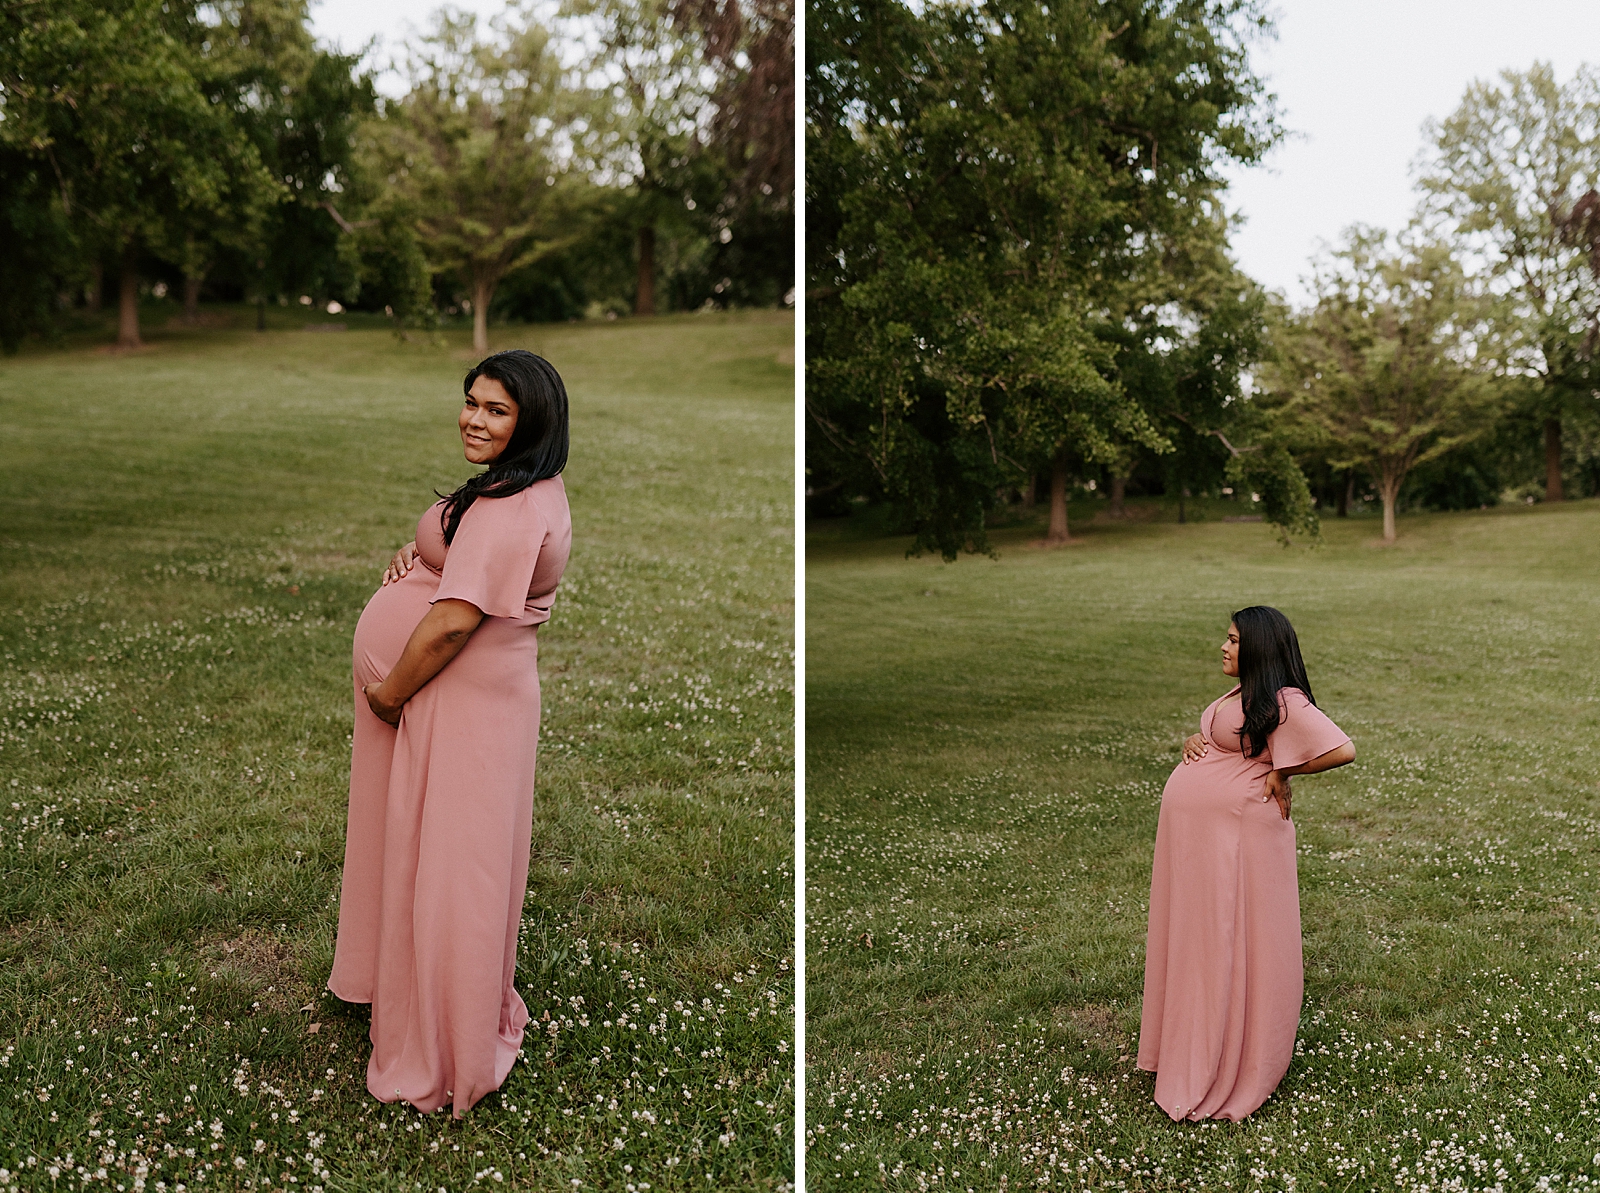 Portraits of pregnant woman on grassy field holding baby bump